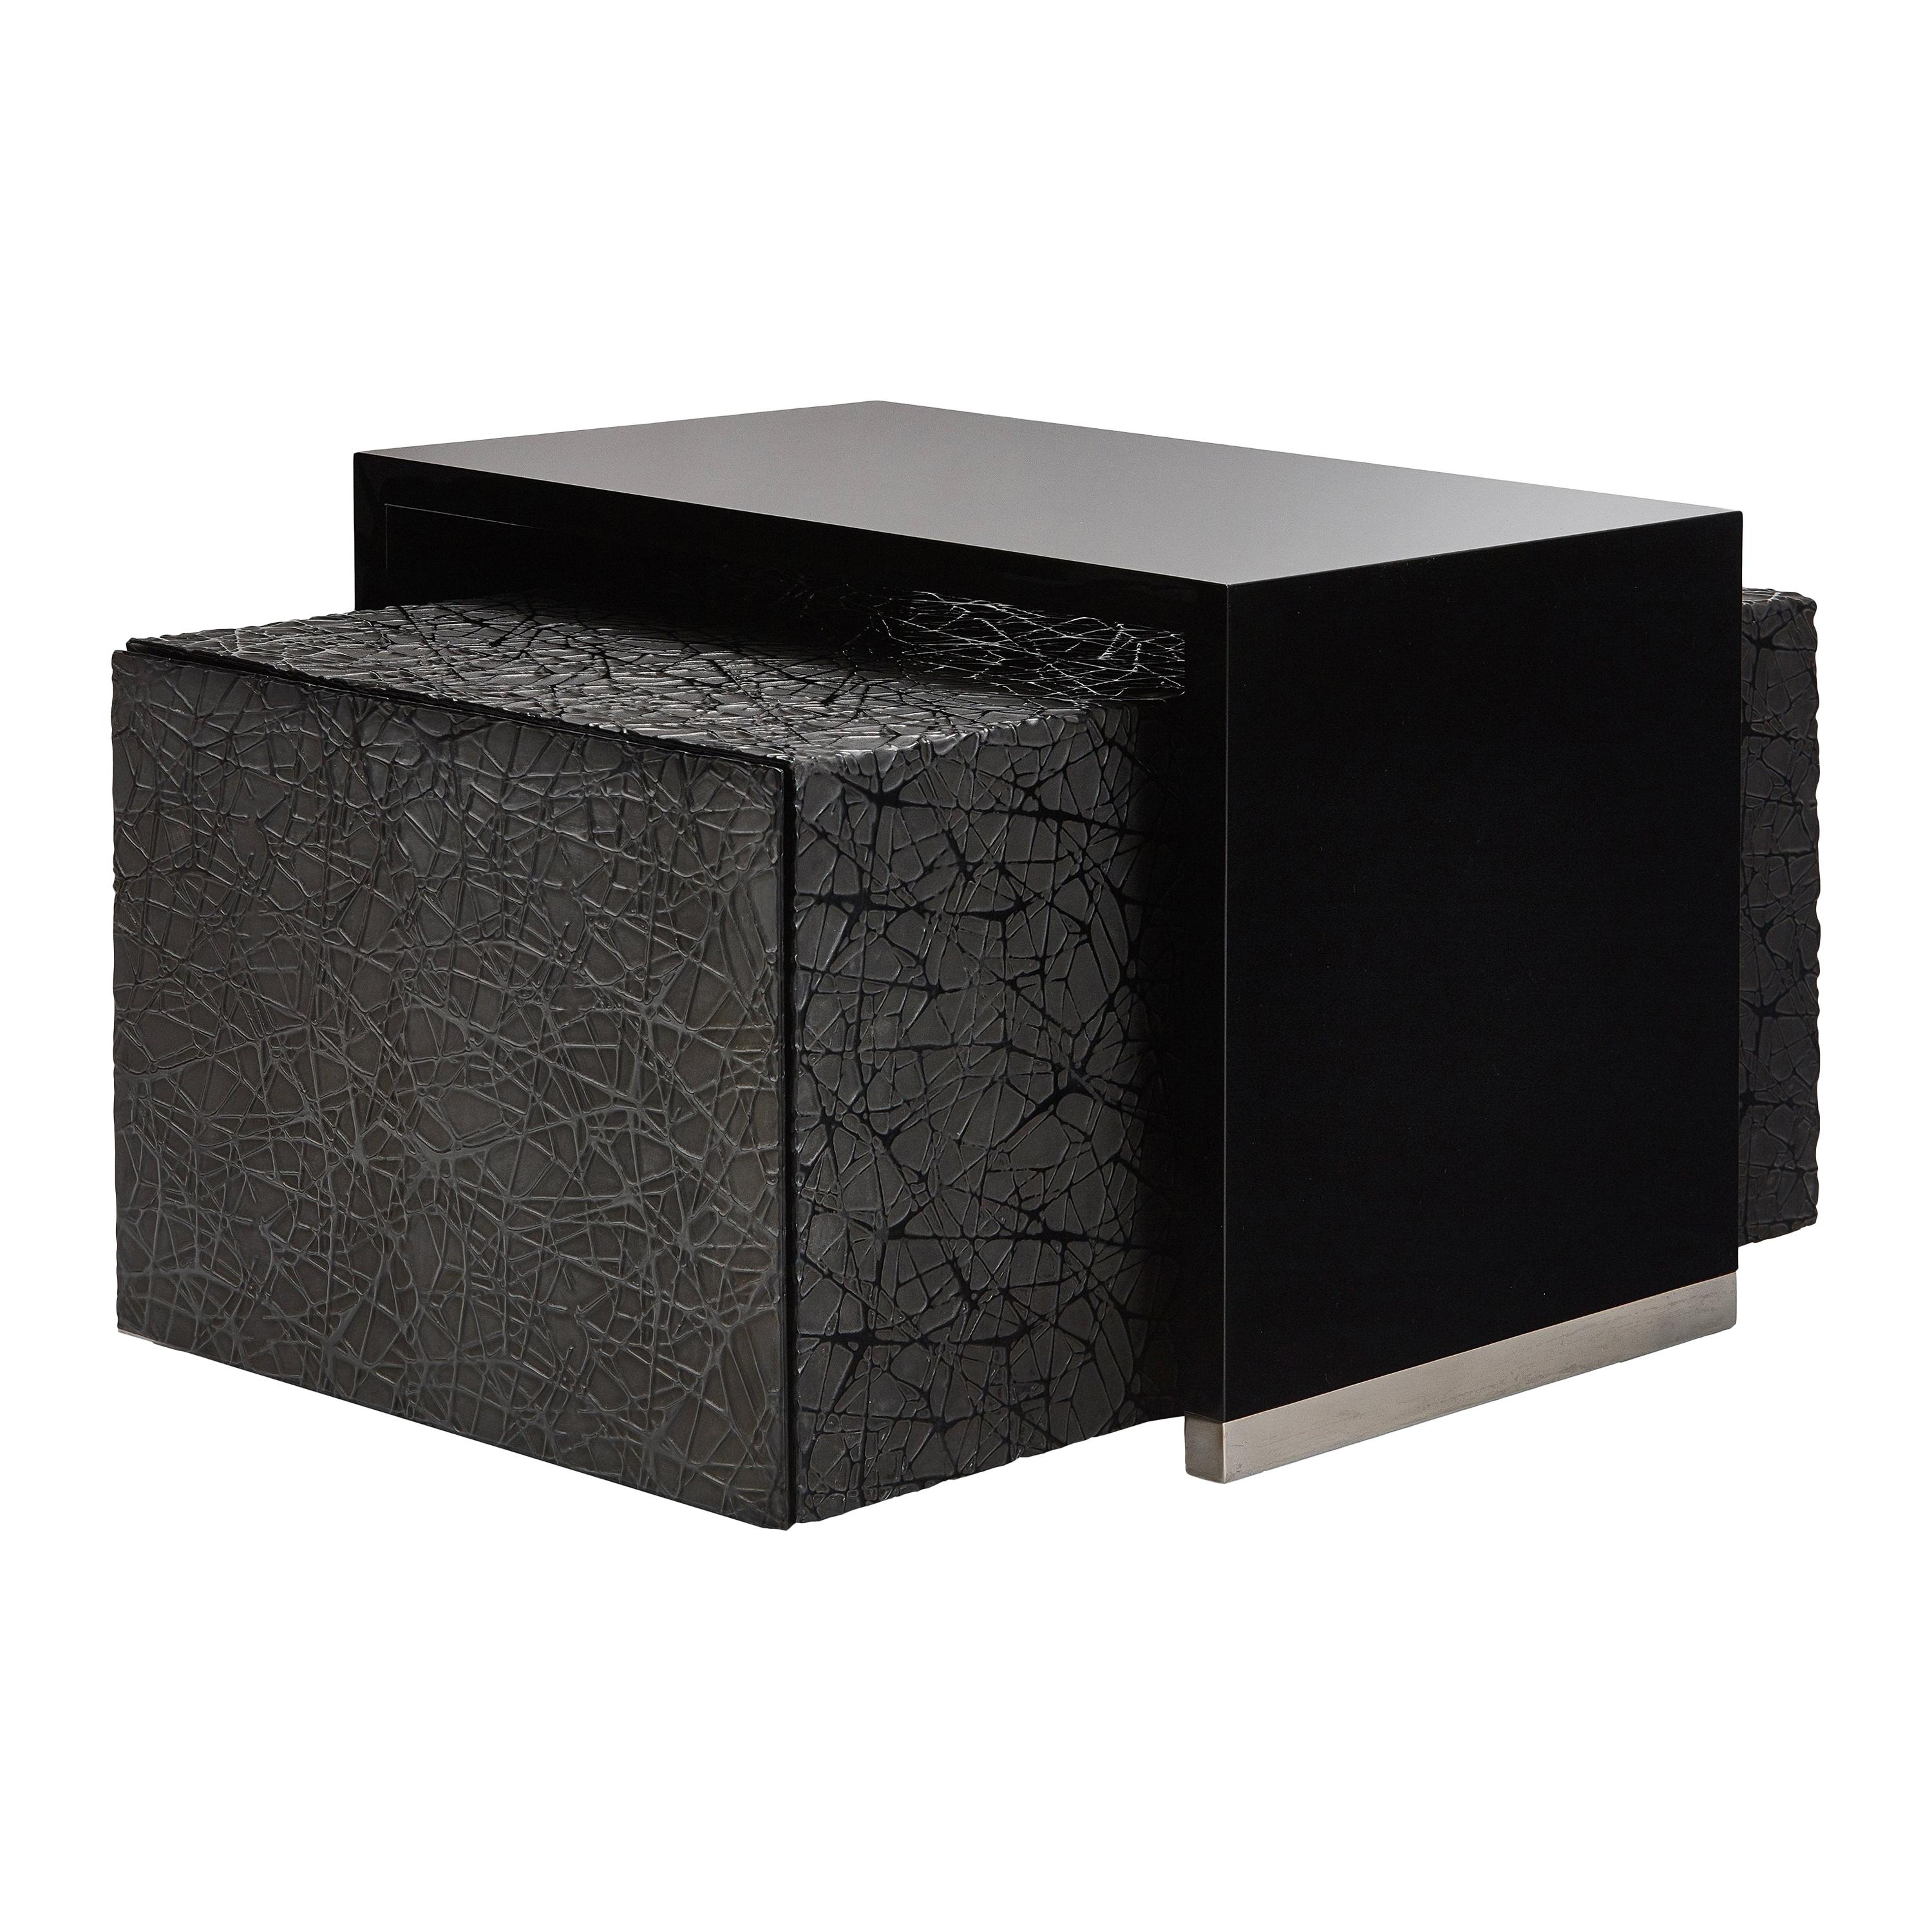 Duo Side Tables with Piano Black Lacquer and Resin Art Texture, Customizable For Sale